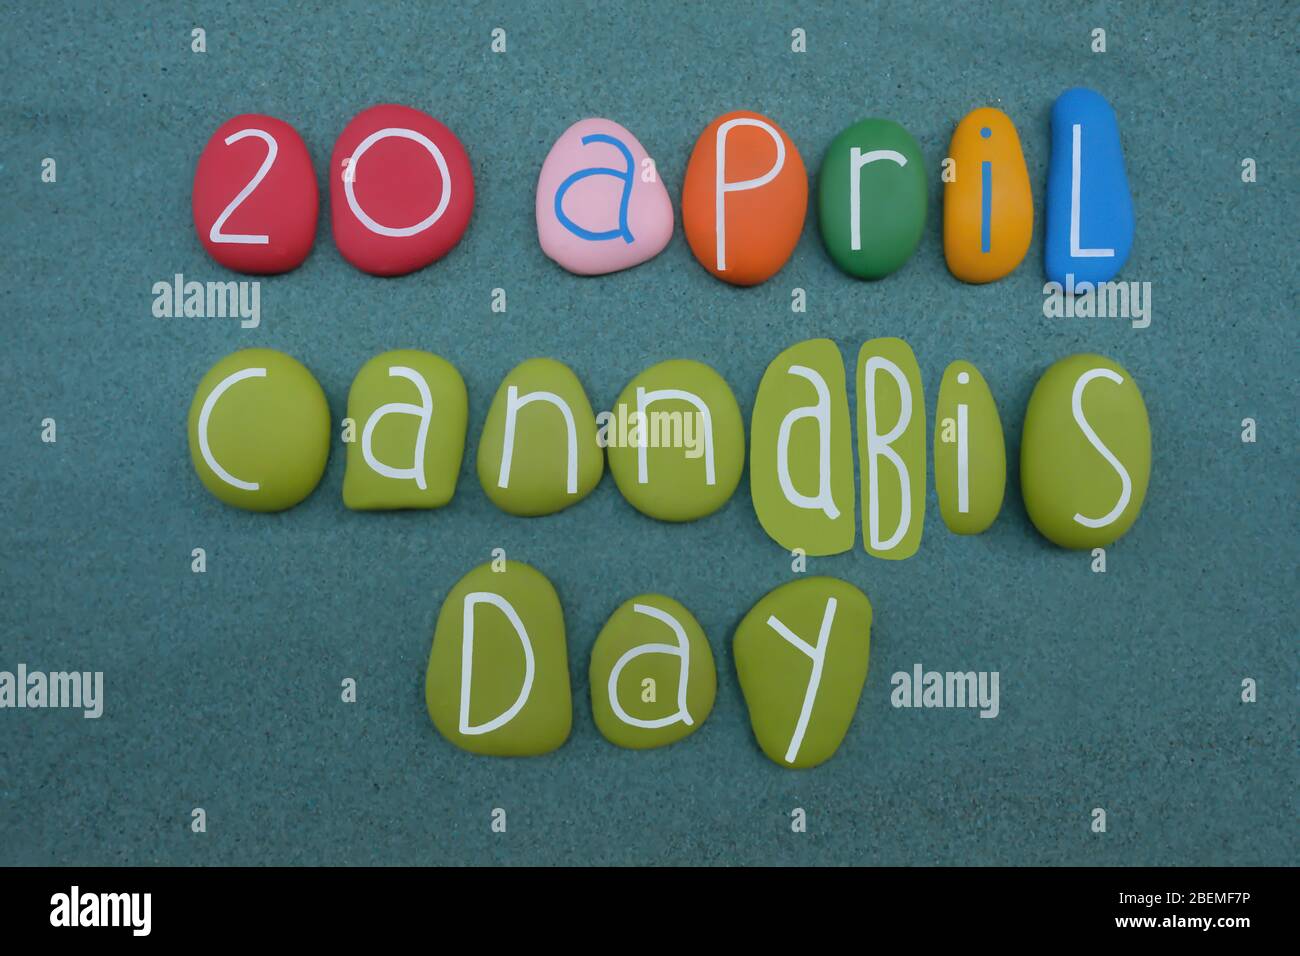 20 April, Cannabis Day celebrated with a multi colored stone letters composition over green sand Stock Photo